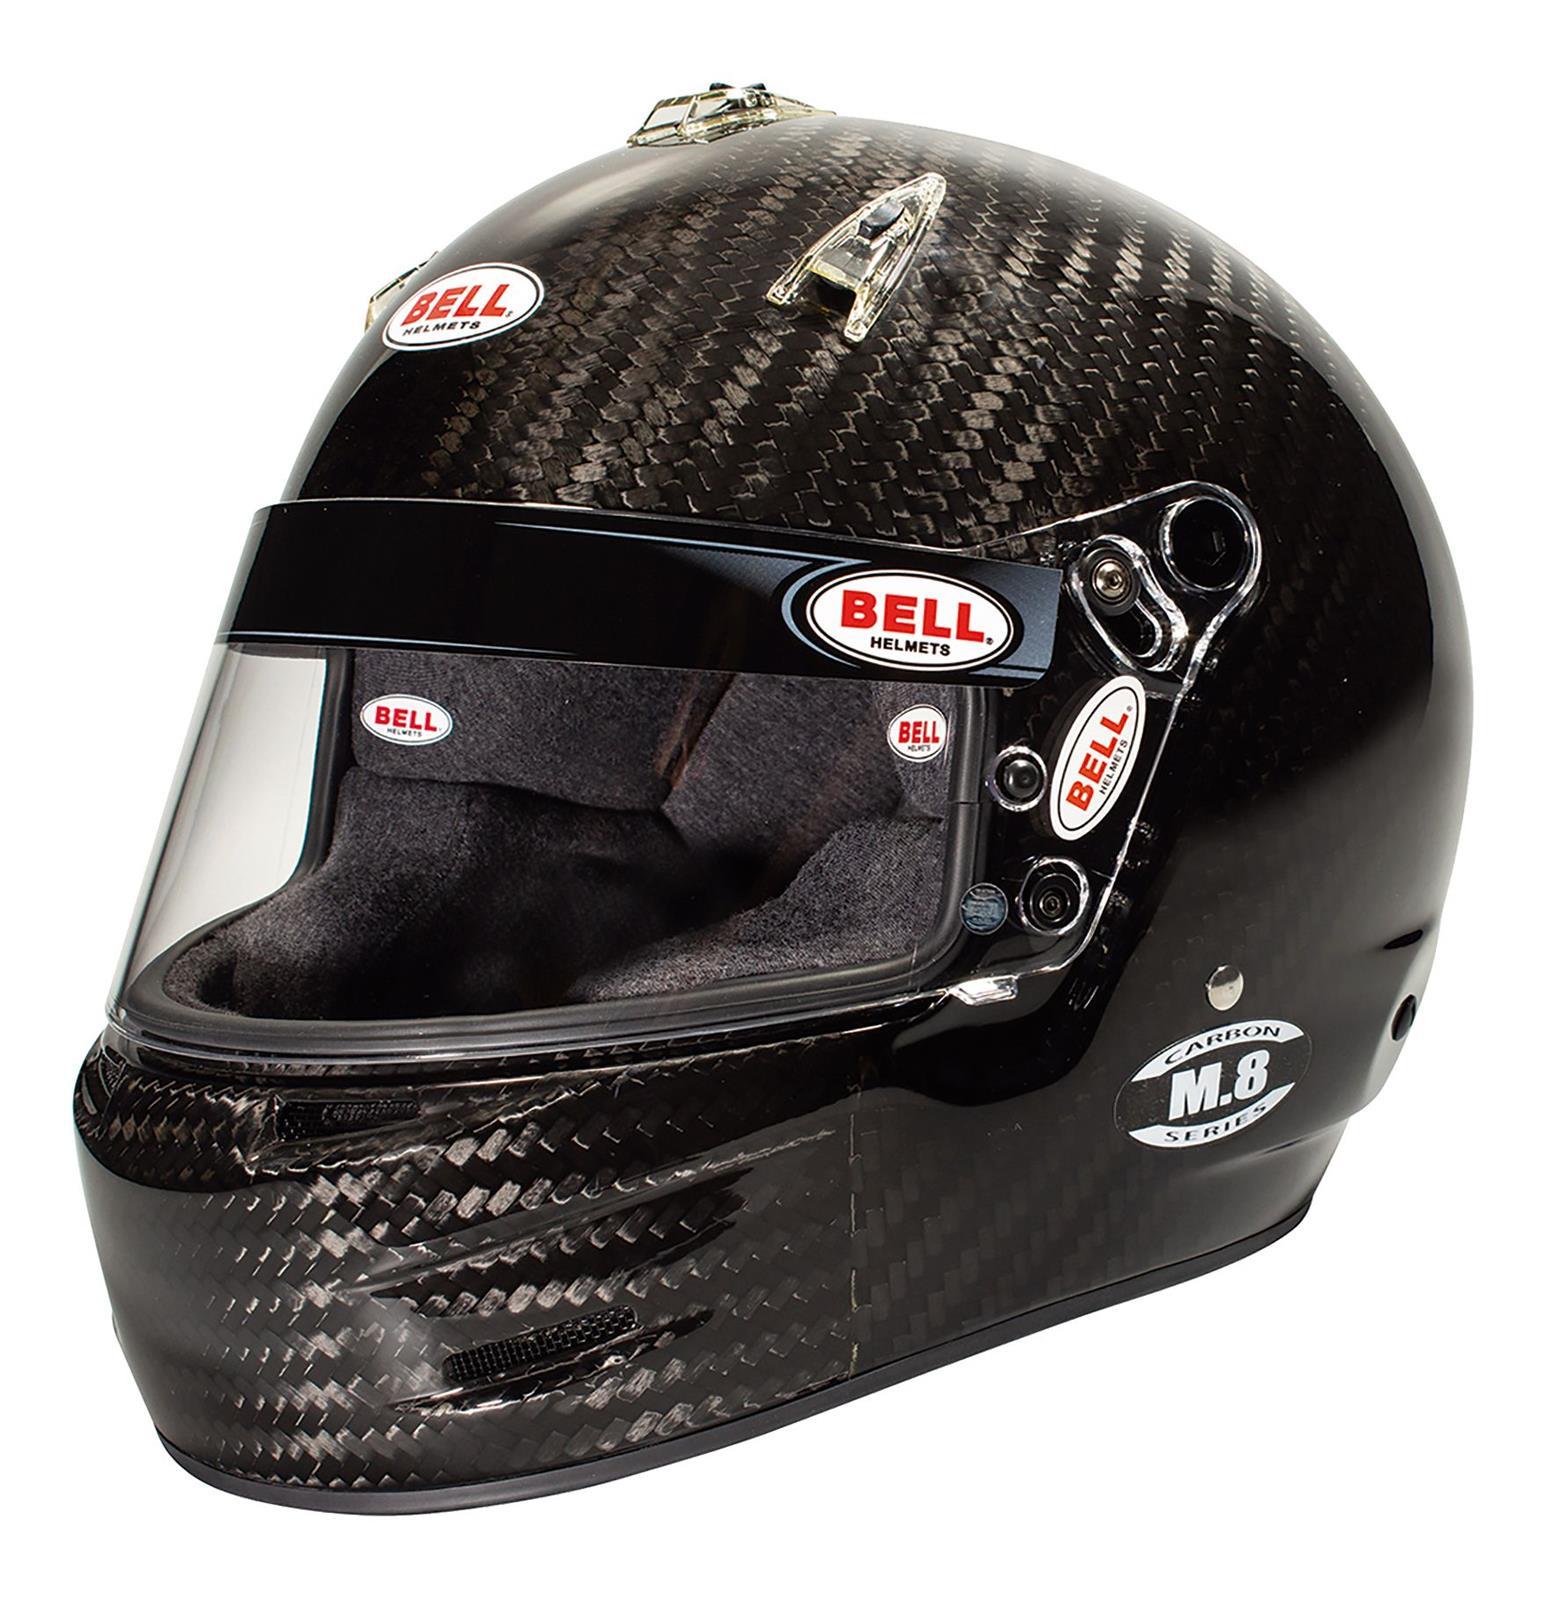 Bell Helmets 1208A08 Helmet, M8, Snell SA2020, FIA Approved, Head and Neck Support Ready, Carbon Fiber, Size 7-5/8+, Each